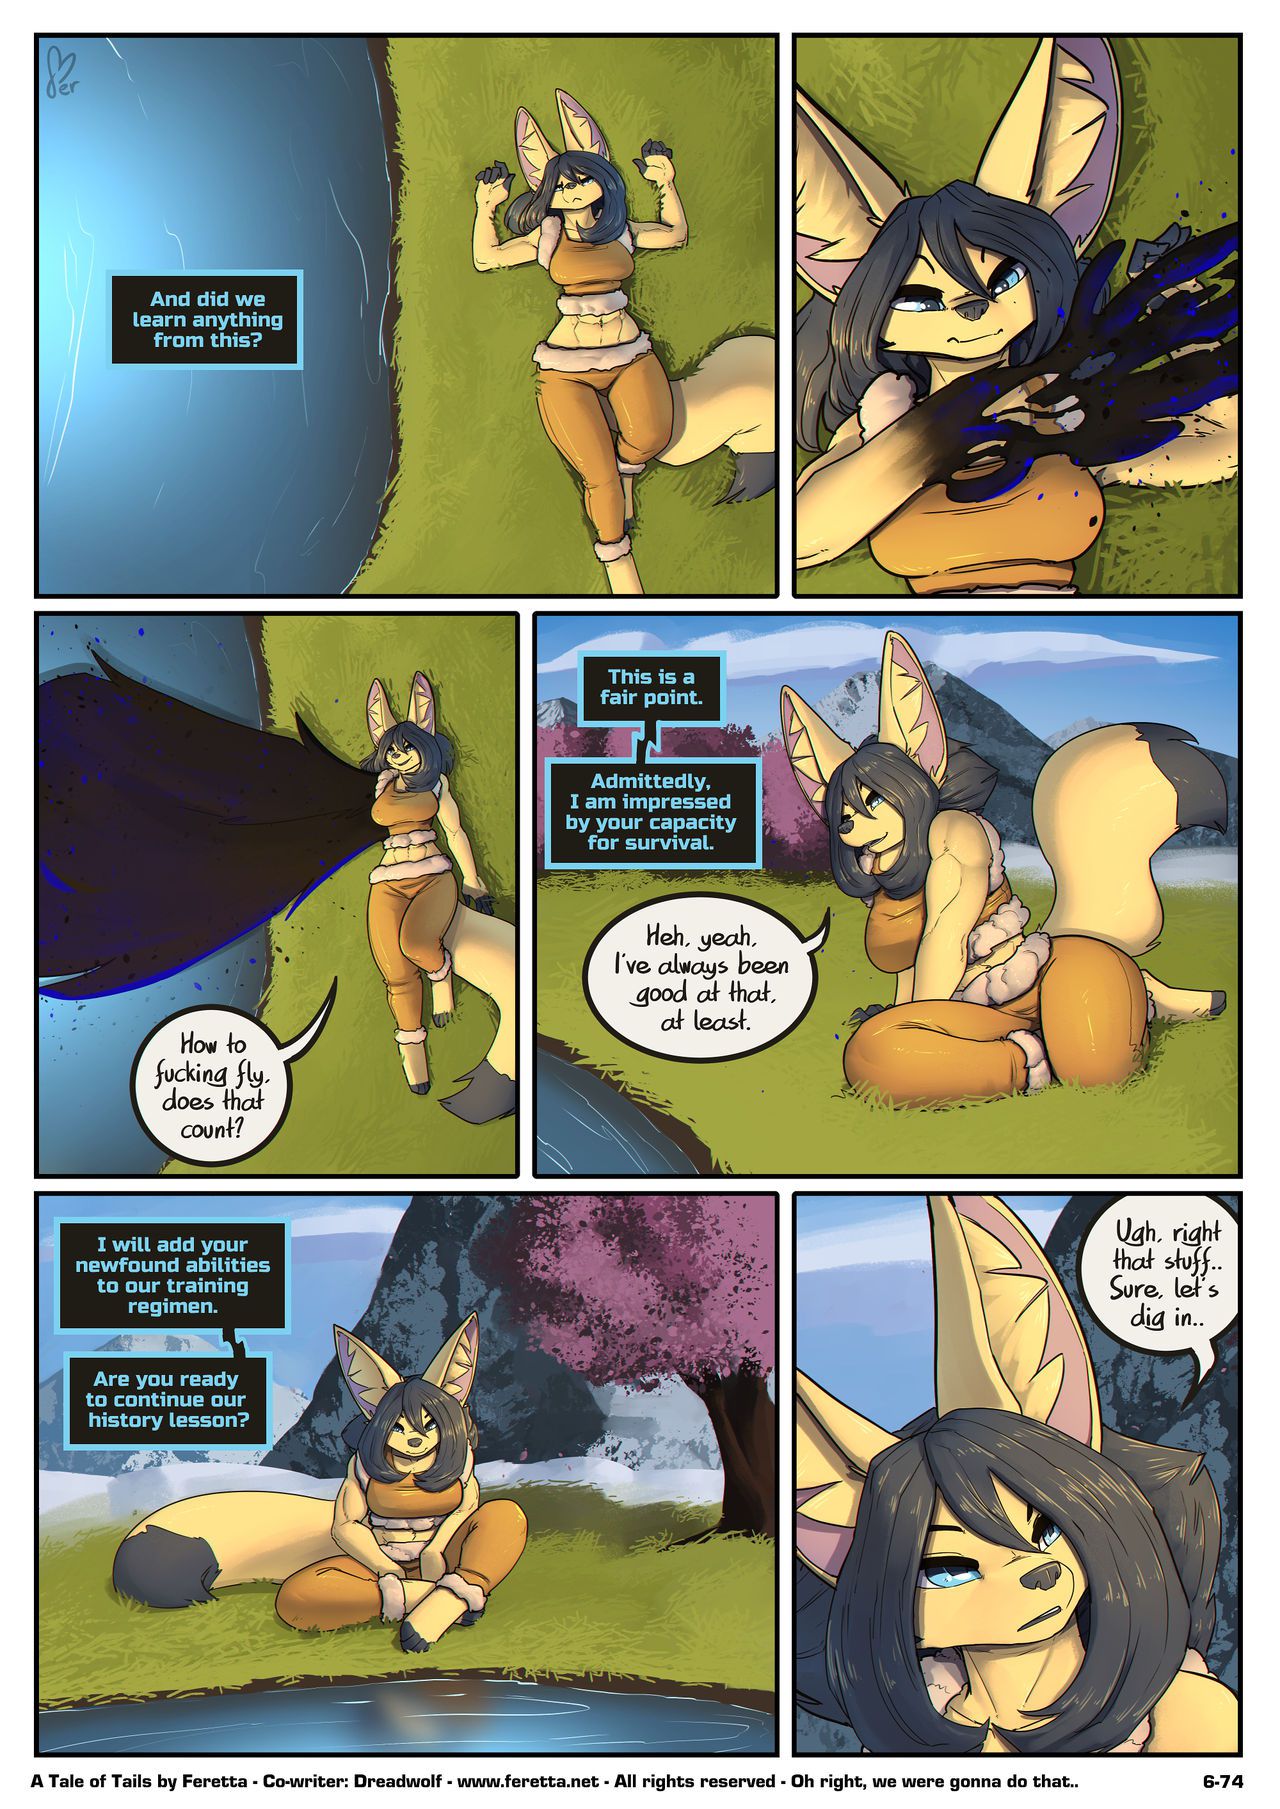 [Feretta] Farellian Legends: A Tale of Tails (w/Extras) [Ongoing] 369